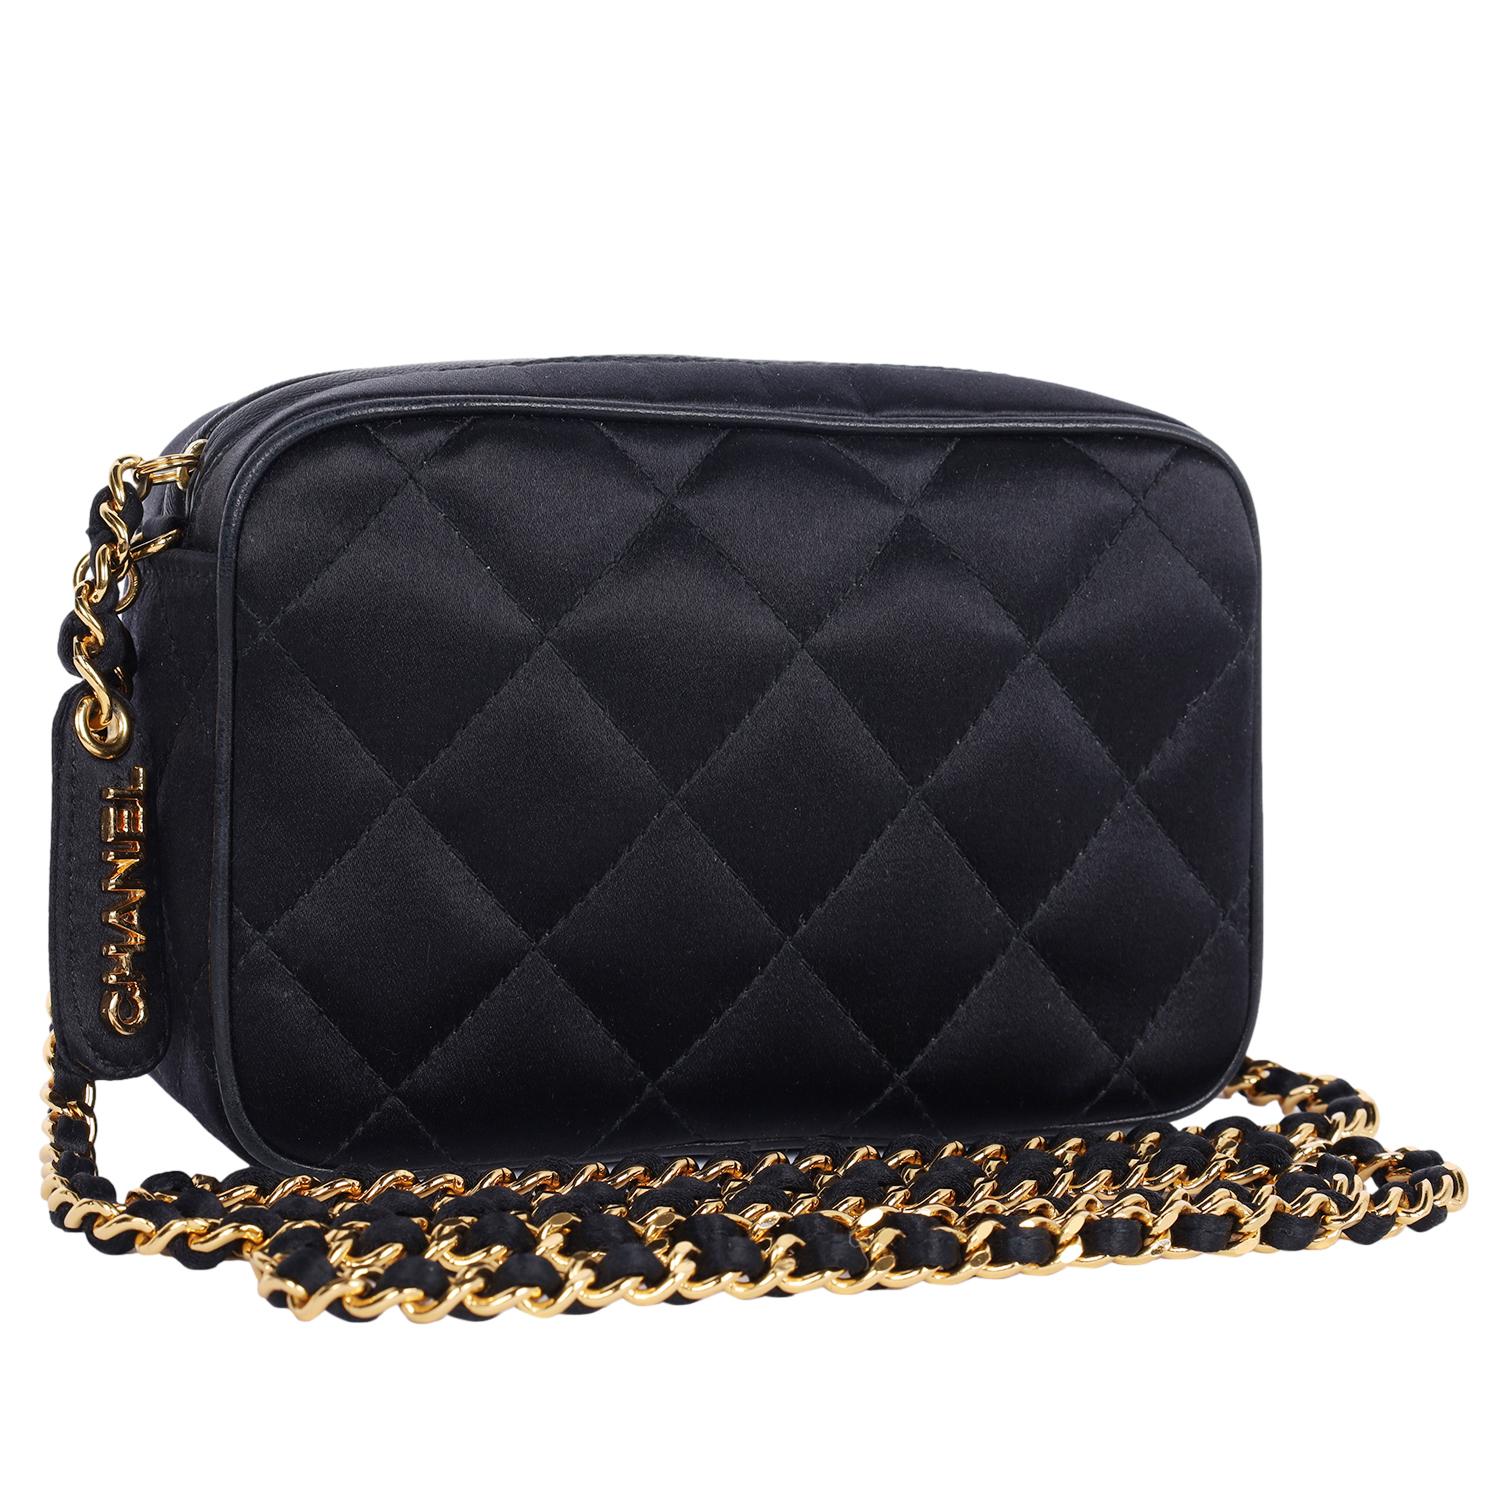 Women's Chanel Mini Satin Leather Quilted Camera Cross Body Bag 1996 For Sale